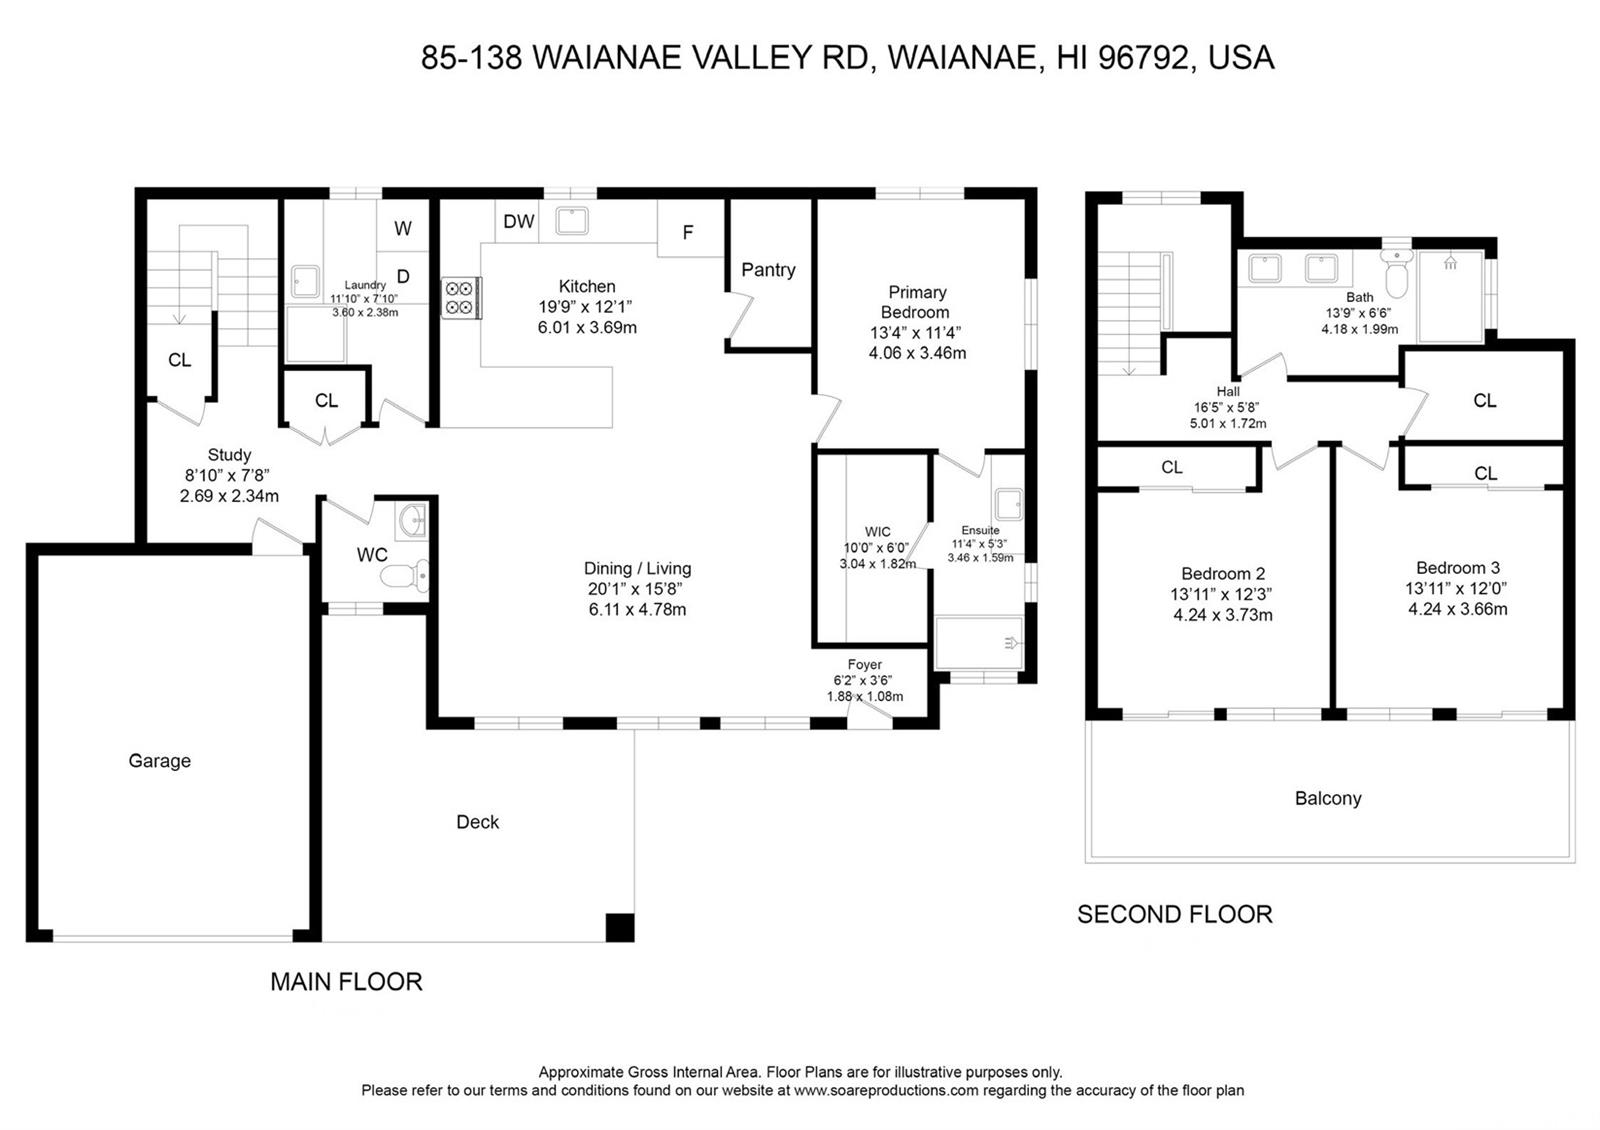 85-138 Waianae Valley Road